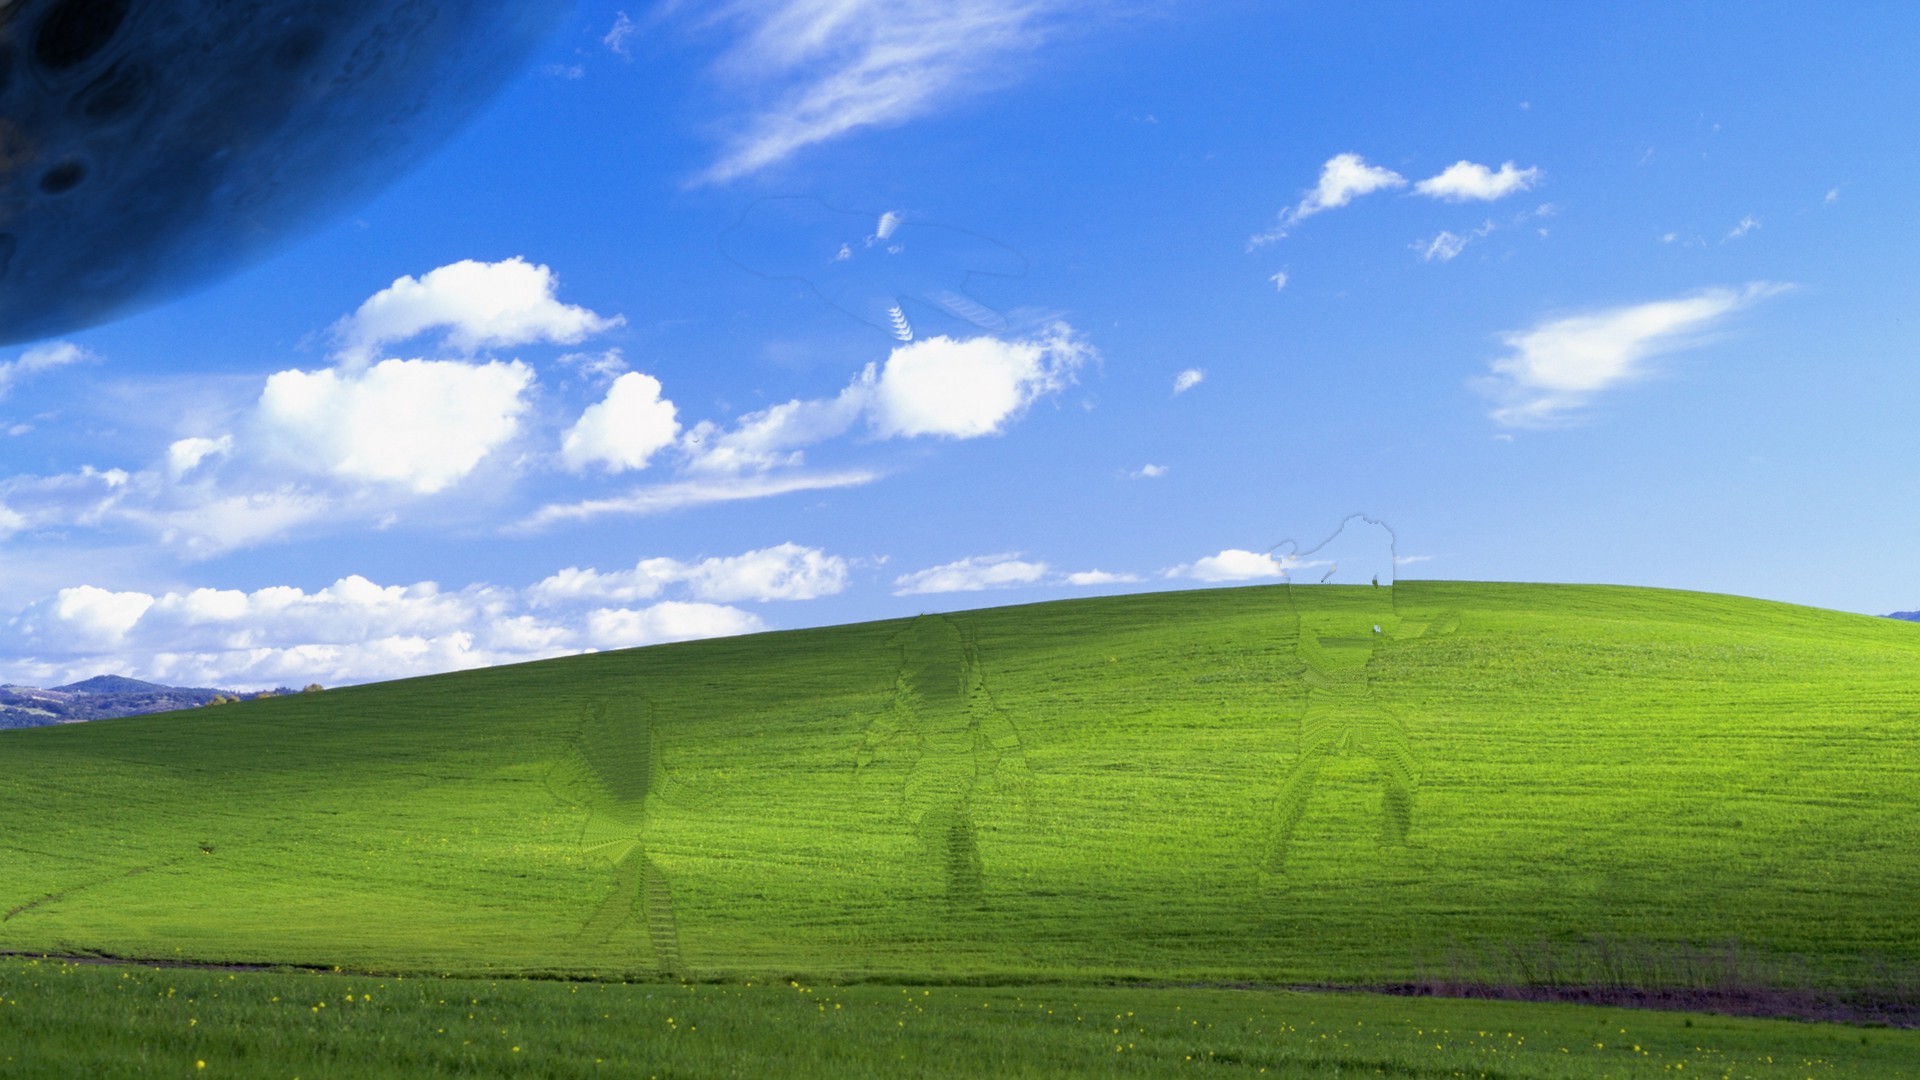 seas0npass for windows xp or later